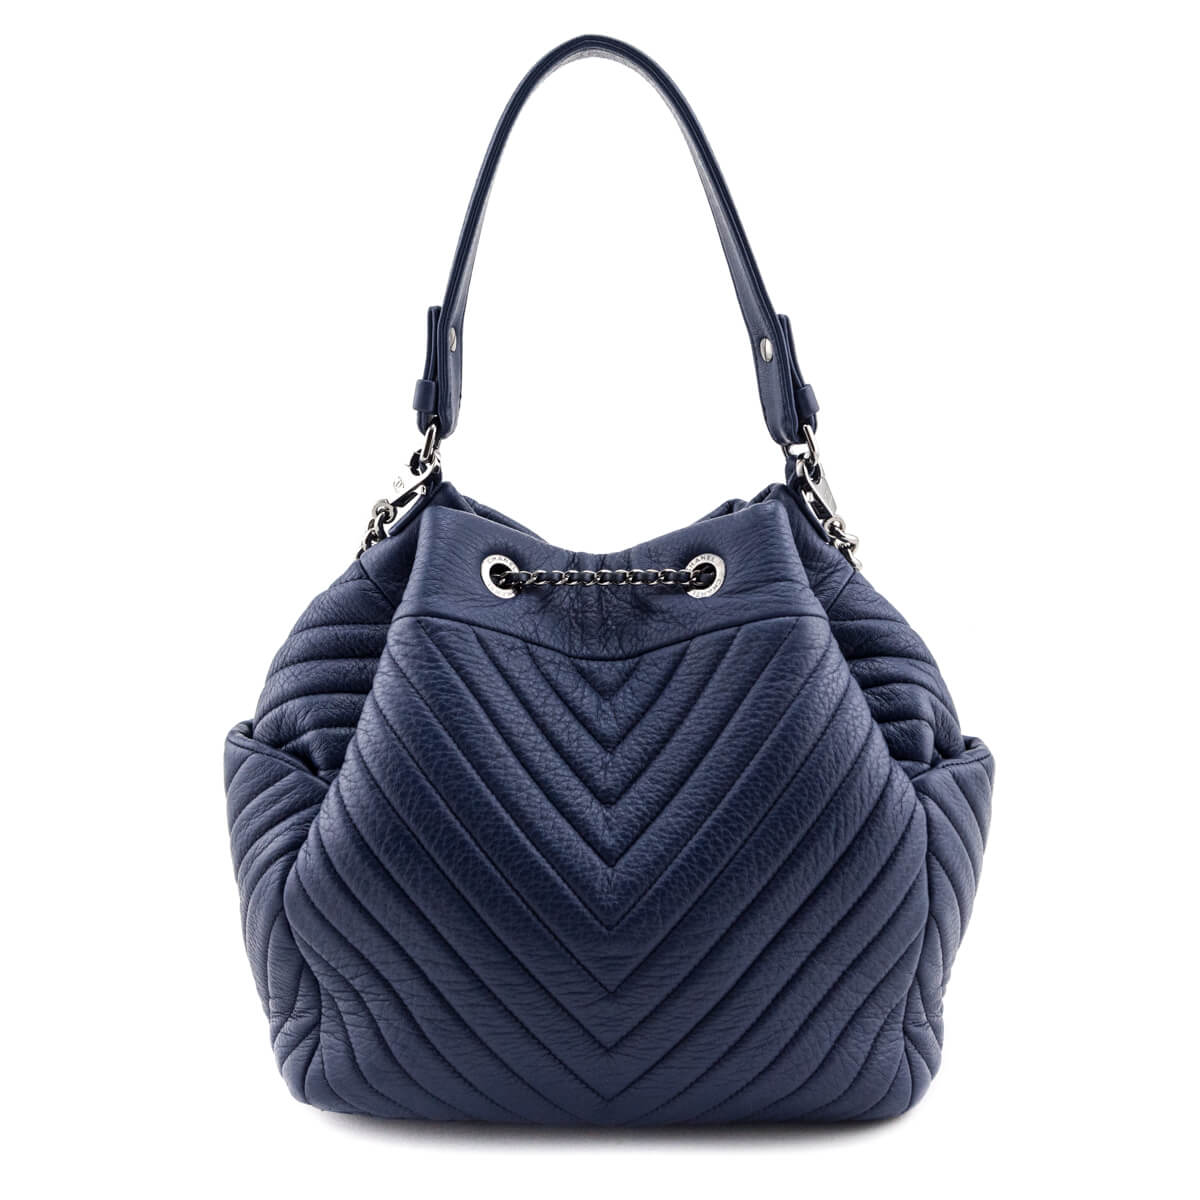 Chanel Blue Quilted Deerskin Chevron Medium Chain Bucket Bag - Love that Bag etc - Preowned Authentic Designer Handbags & Preloved Fashions